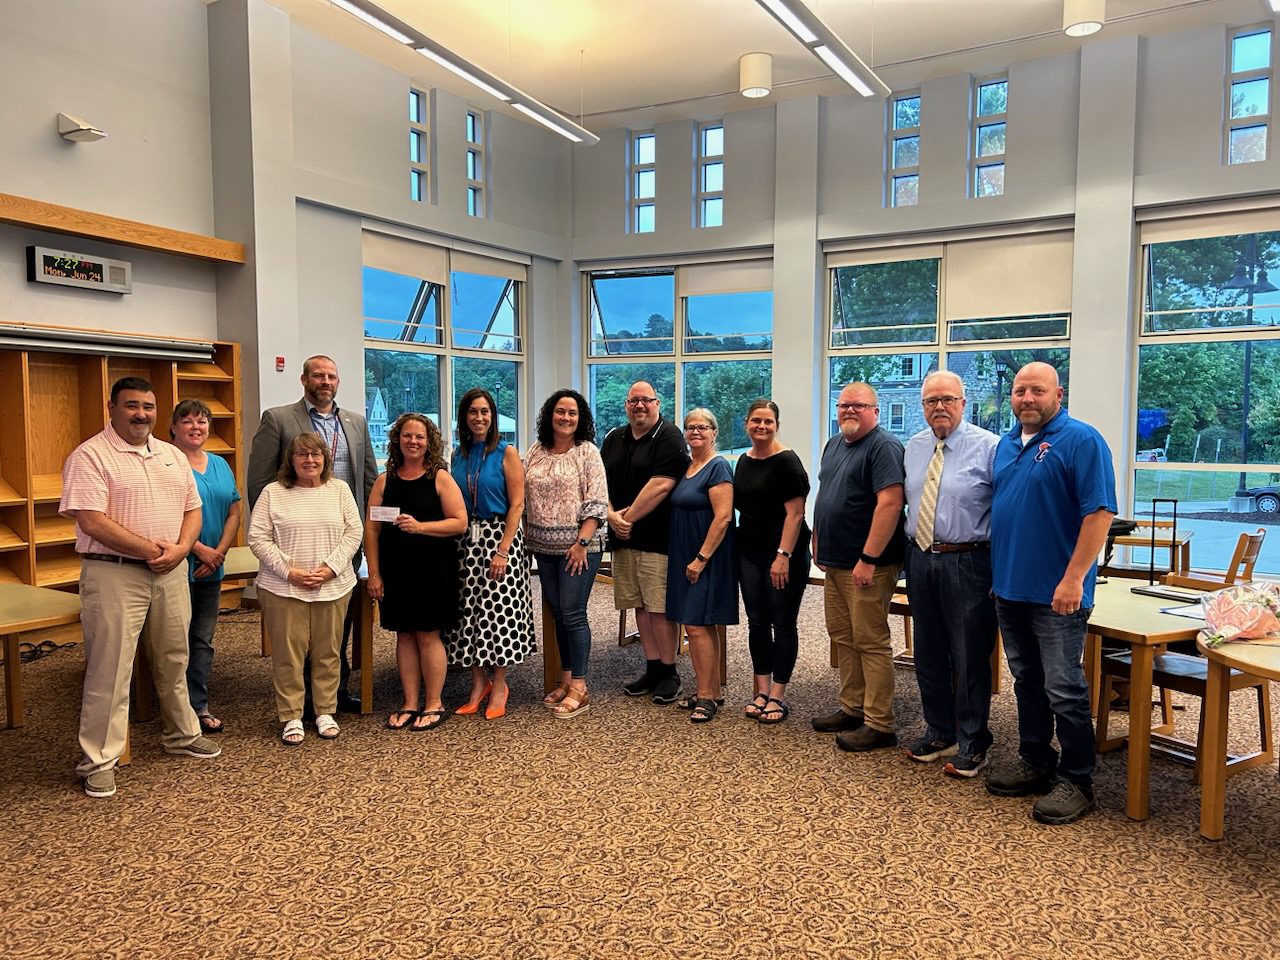 Catskill administrators, Board members and Teacher Association members pose with check in Catskill High School library. 